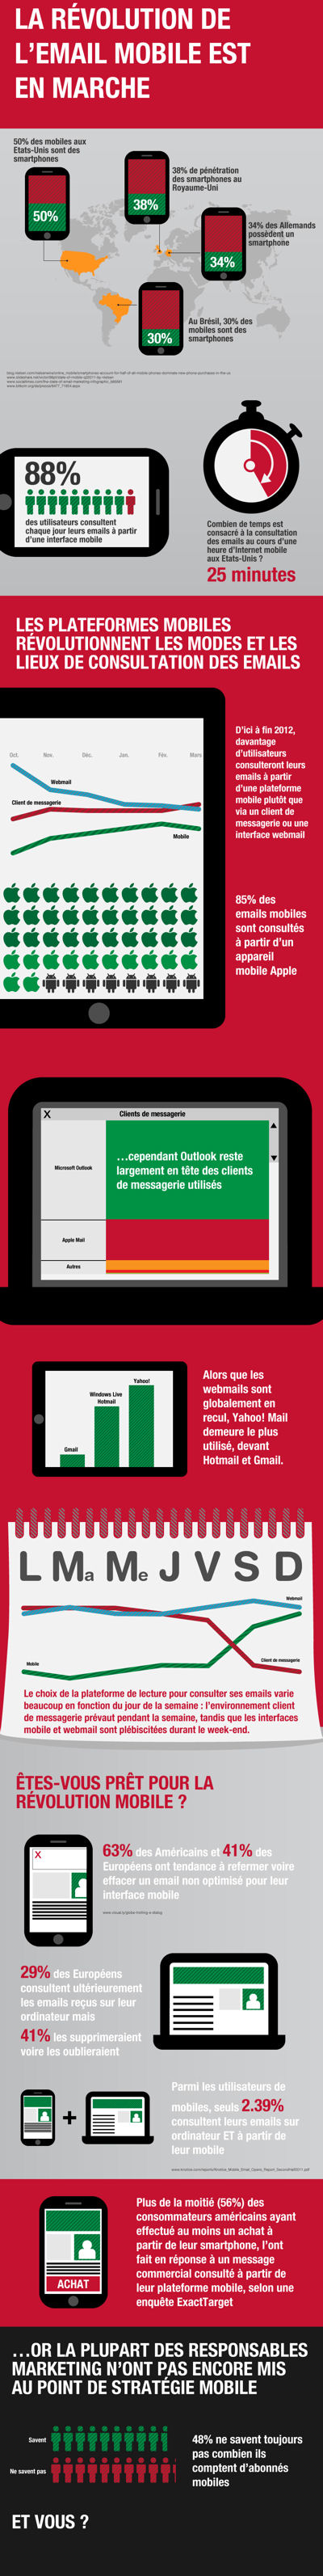 NL498-image-mobile_infographic_400-ebusiness-internet-mobile-1224325